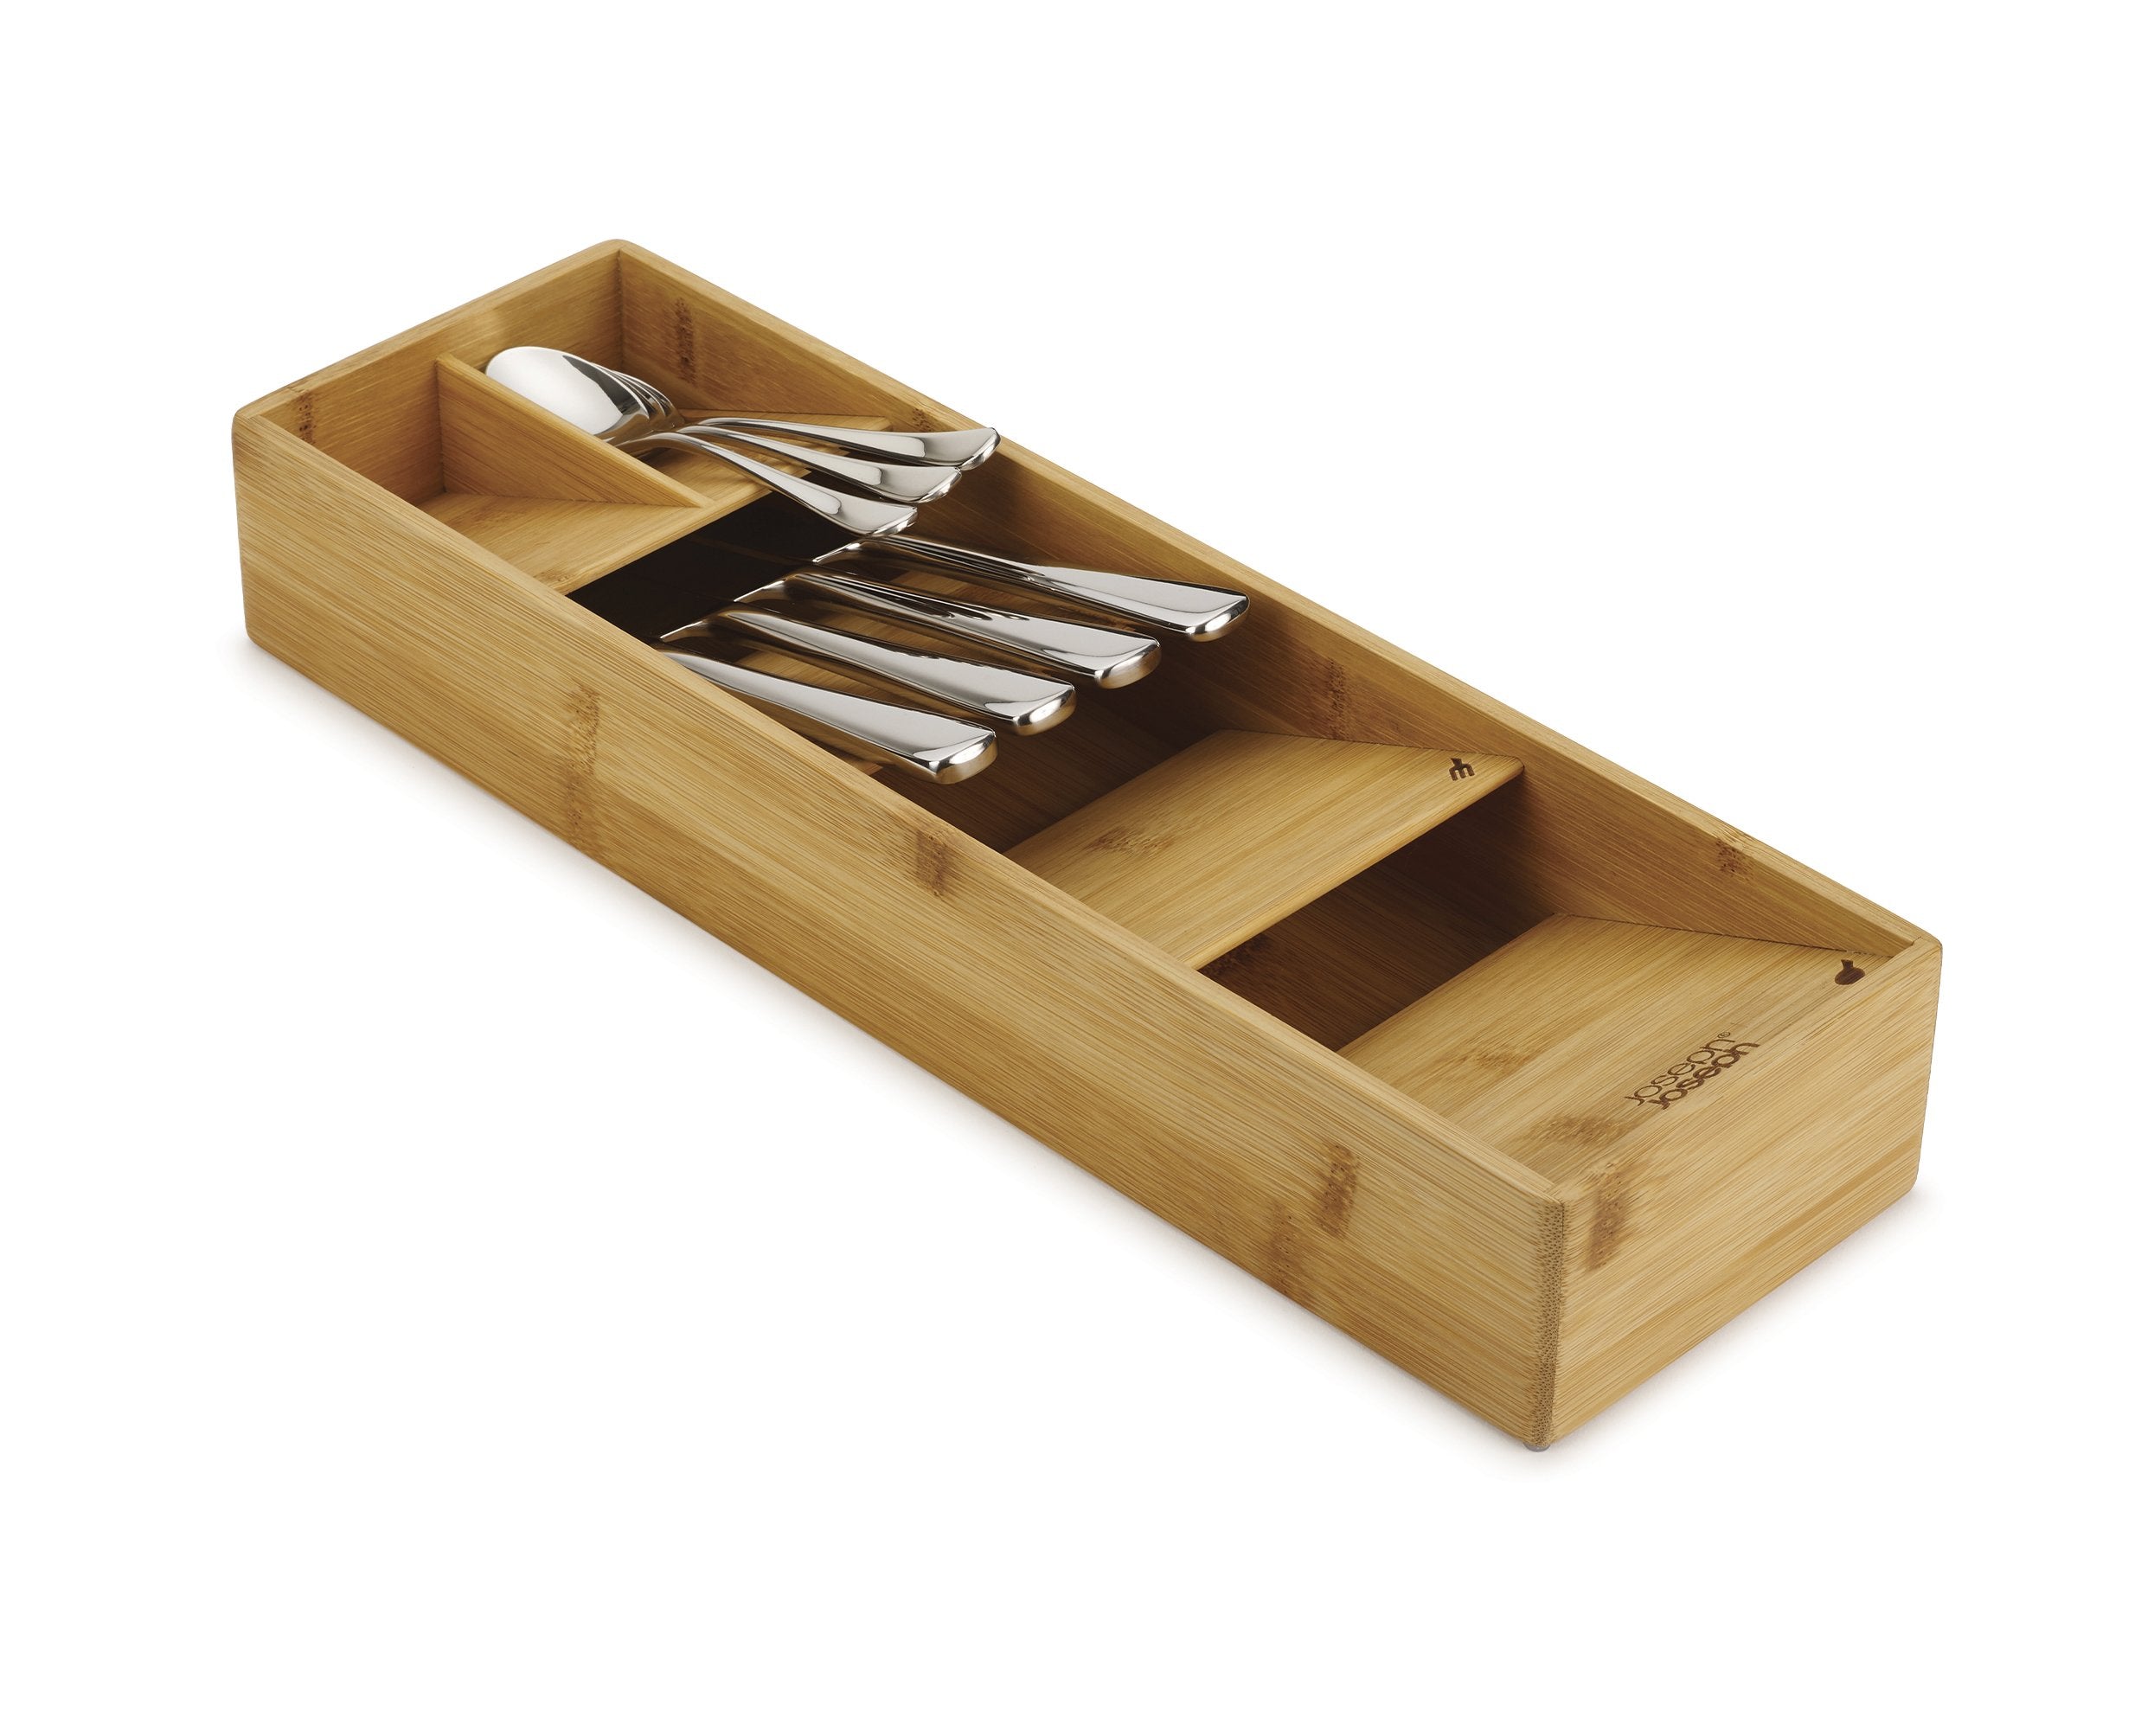 BEON.COM.AU  Made from beautiful natural bamboo, this revolutionary design is such a simple but effective idea. By layering each compartment on top of each other, it enables you to store a full cutlery set in less than half the space of a conventional cutlery tray.  Unique design creates more space in your d... Joseph Joseph at BEON.COM.AU